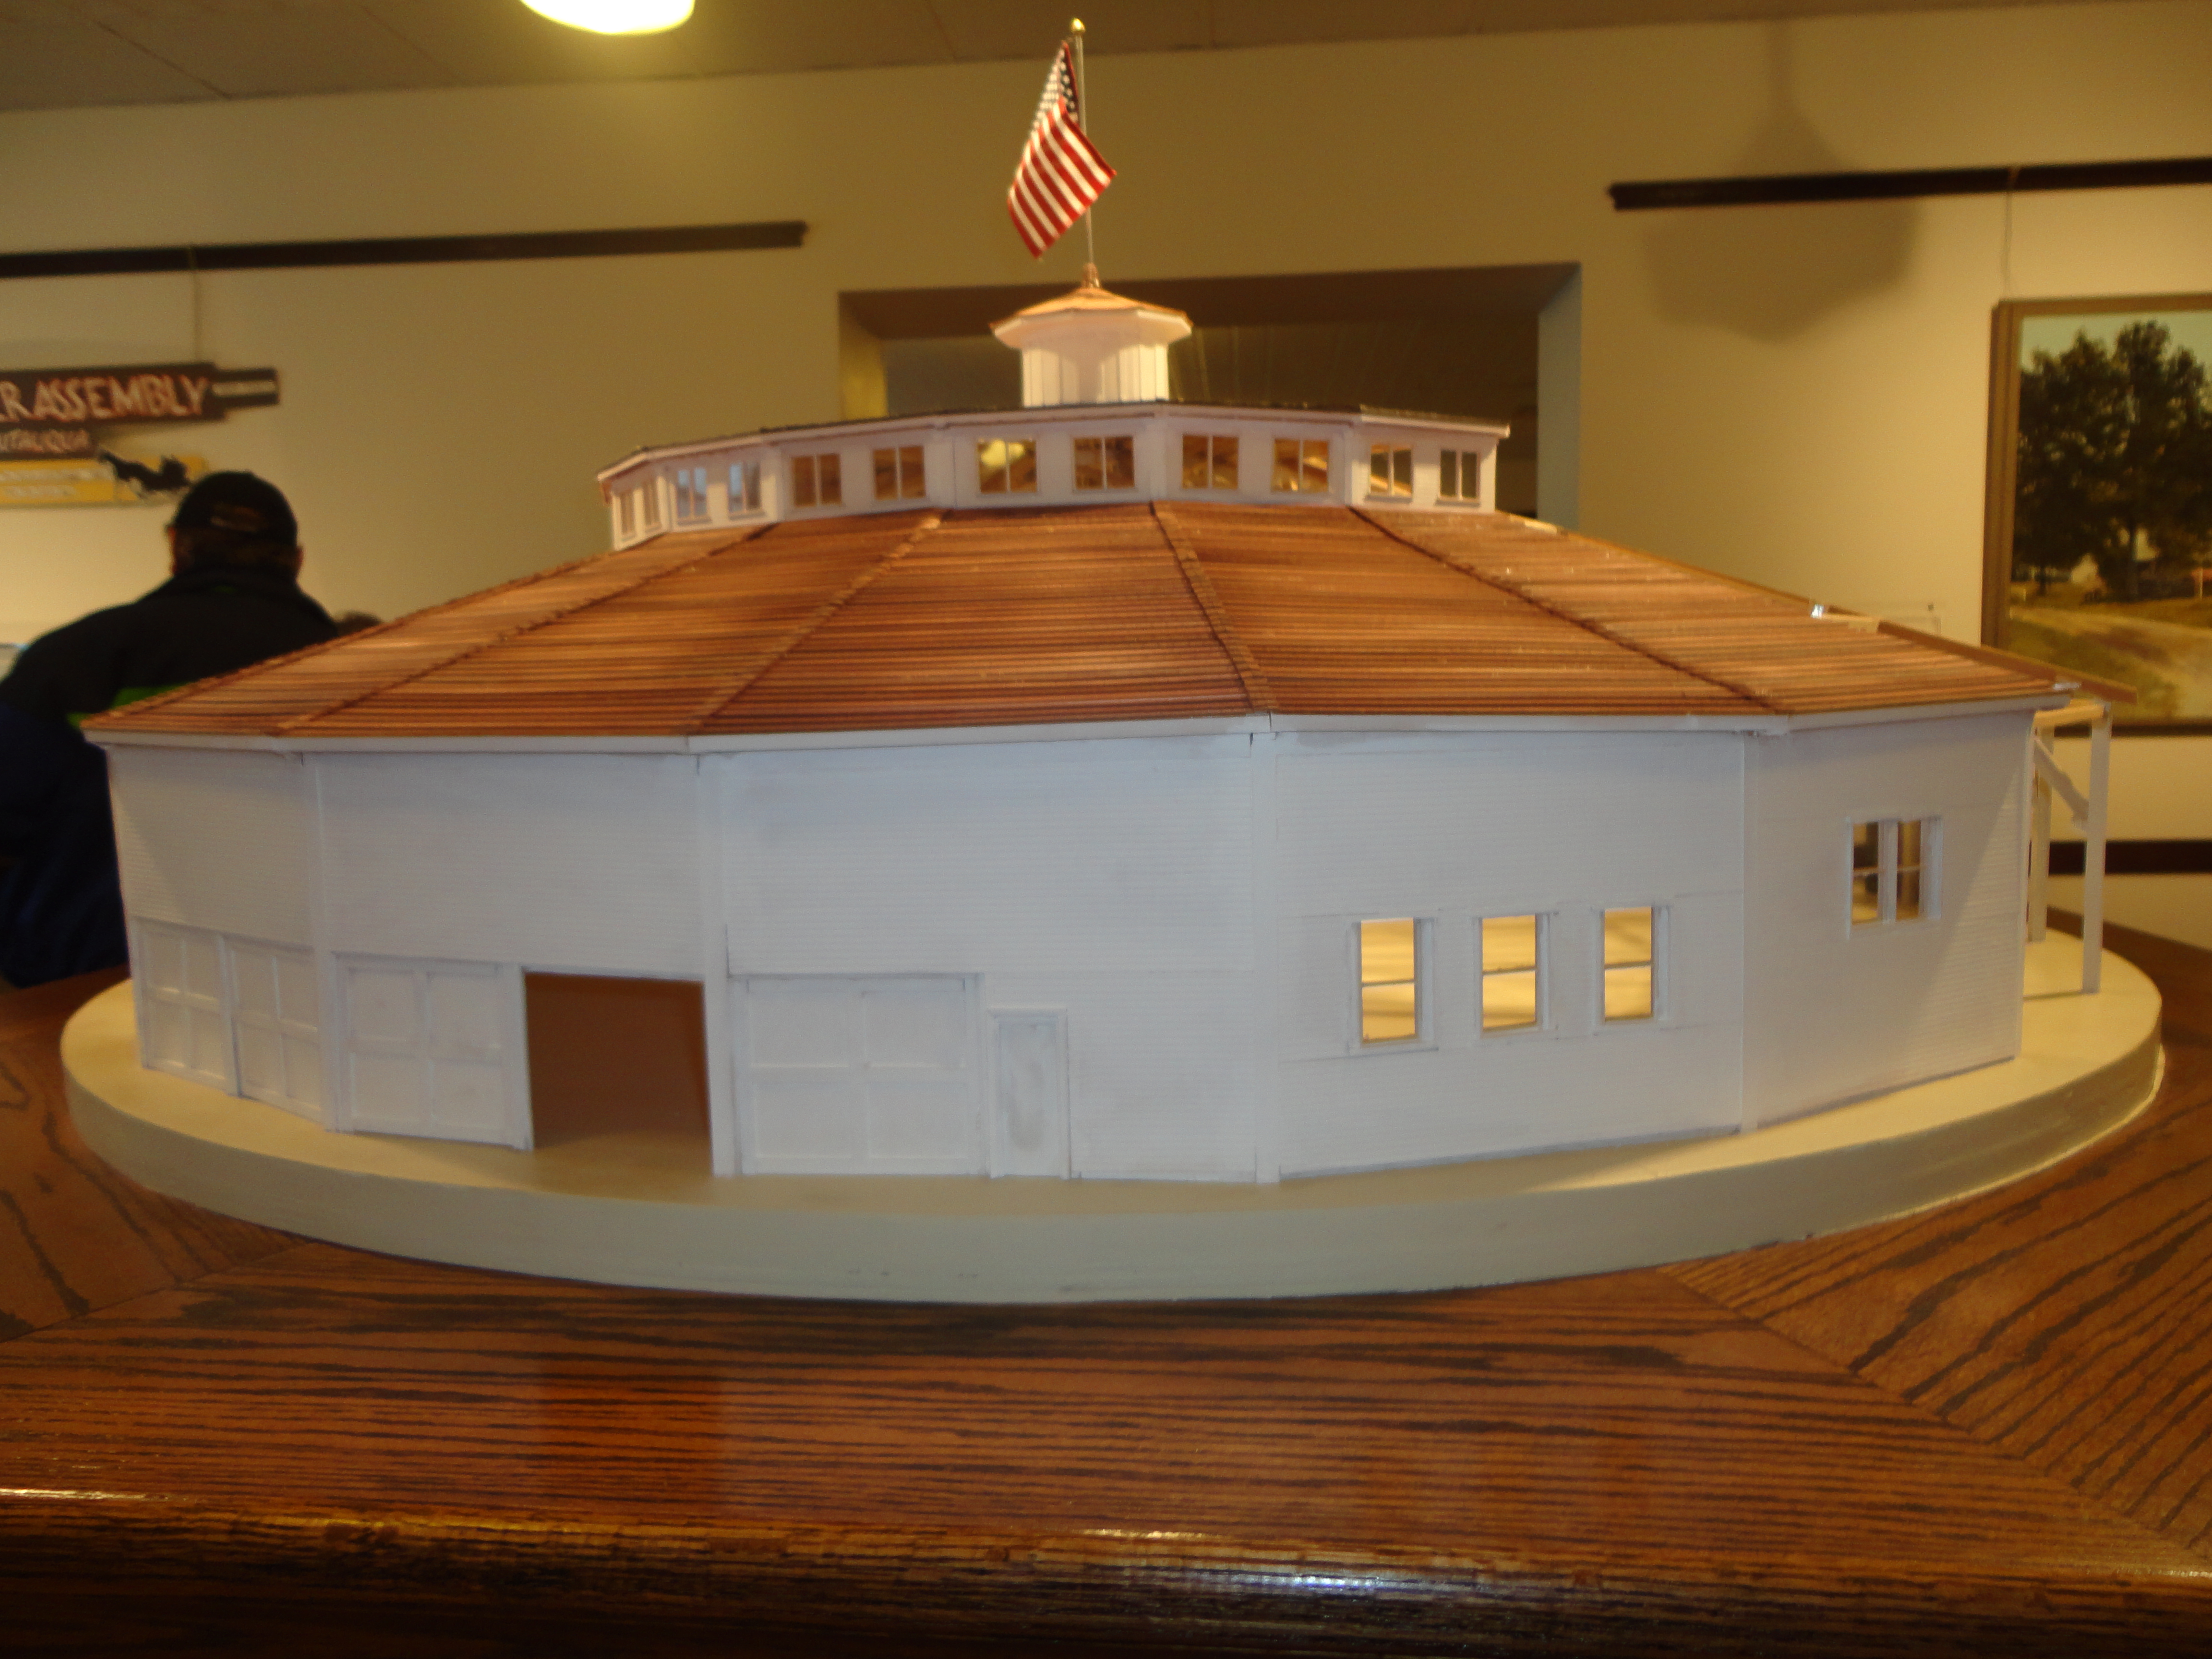 Model at Dixon Historic Center, real one in Shelbyville, IL